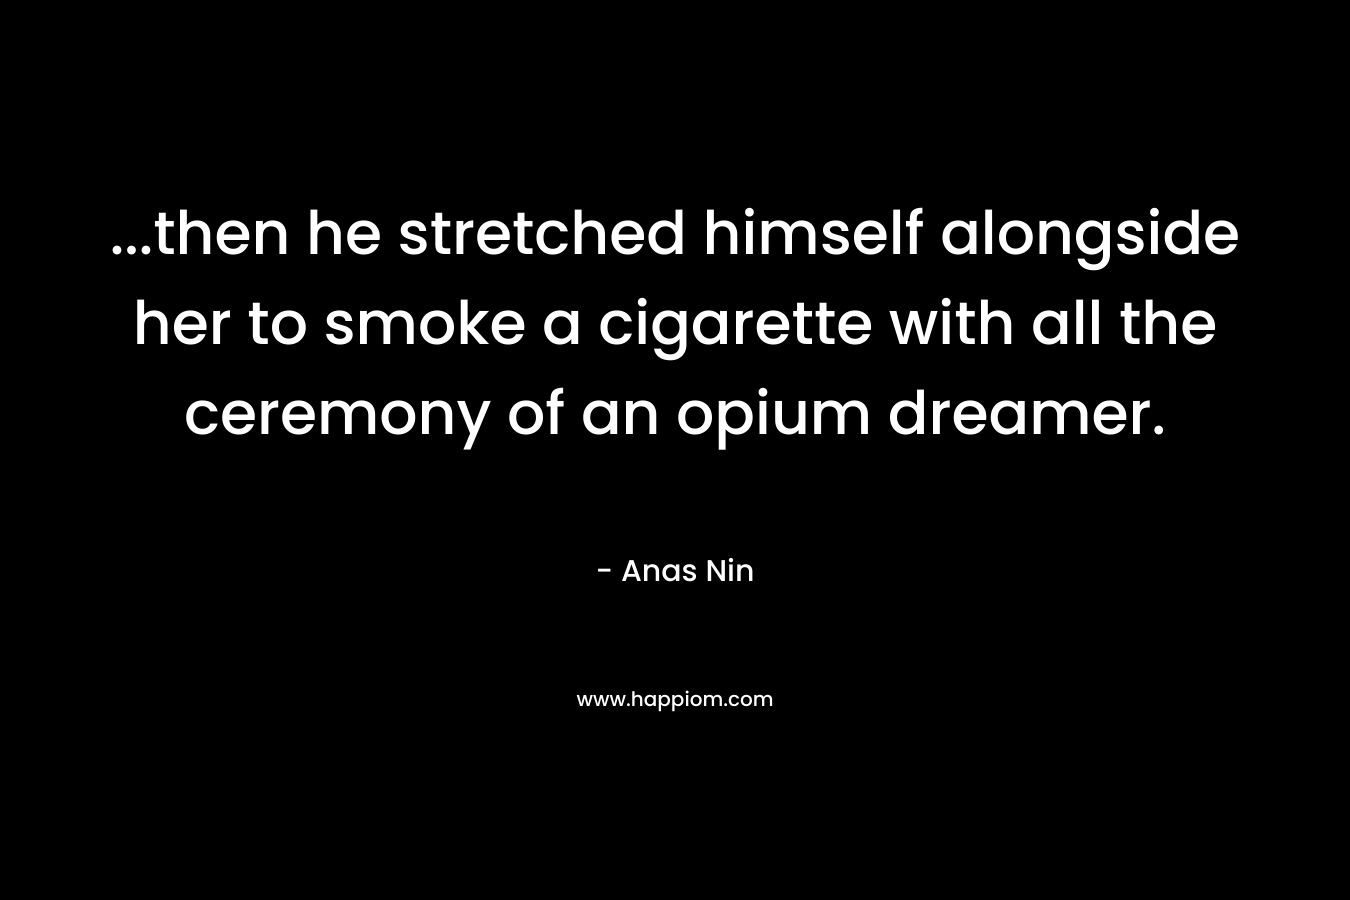 ...then he stretched himself alongside her to smoke a cigarette with all the ceremony of an opium dreamer.